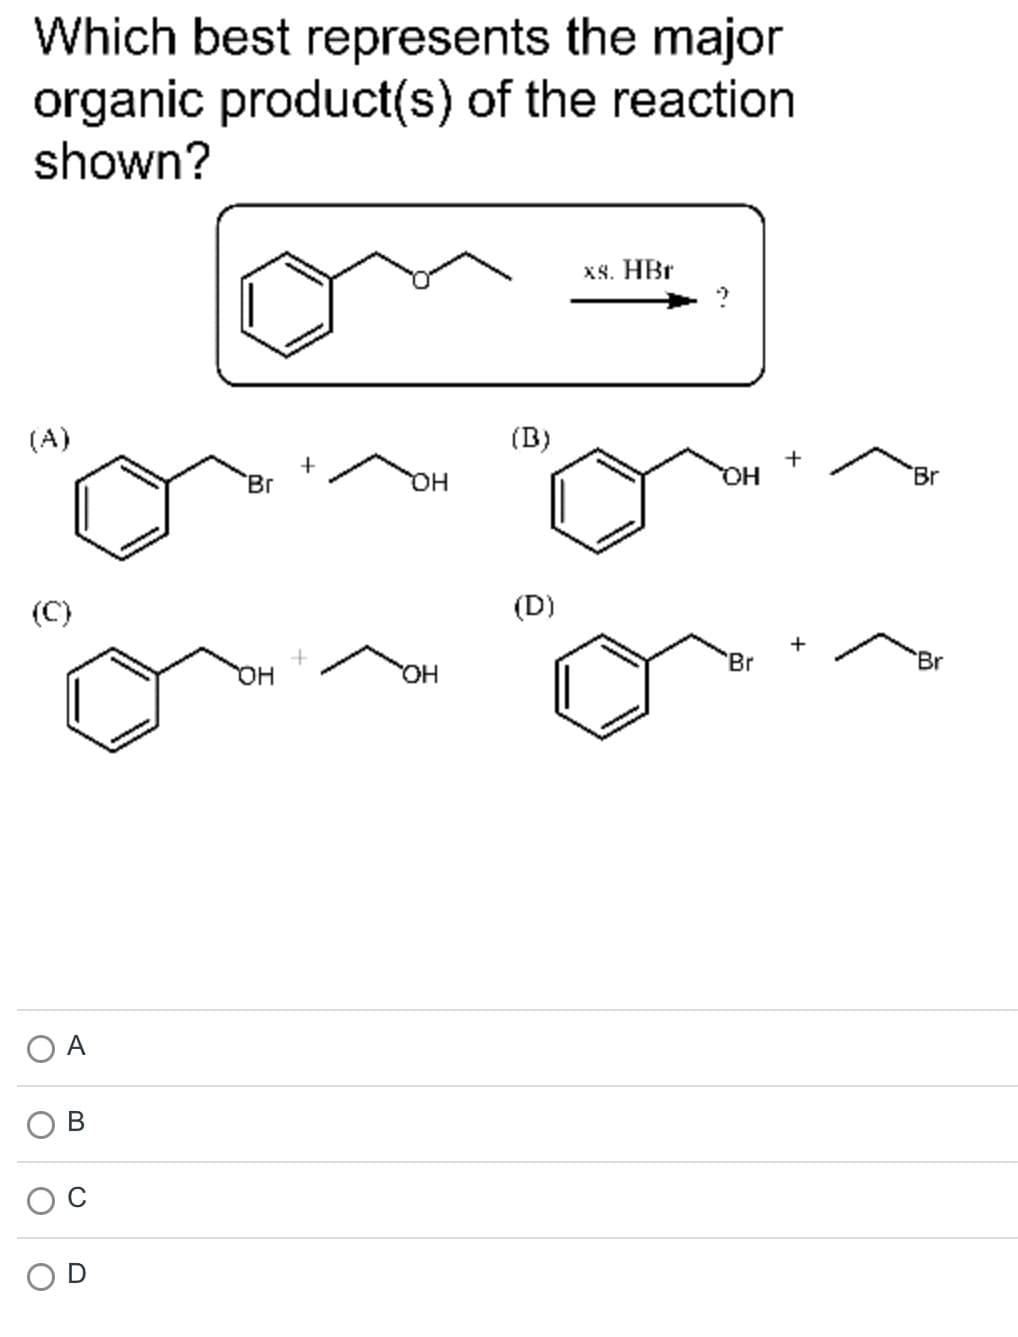 Which best represents the major
organic product(s) of the reaction
shown?
(A)
(C)
O
O
A
O
'Br
OH
+
OH
OH
(B)
(D)
xs. HBr
OH
Br
+
Br
Br